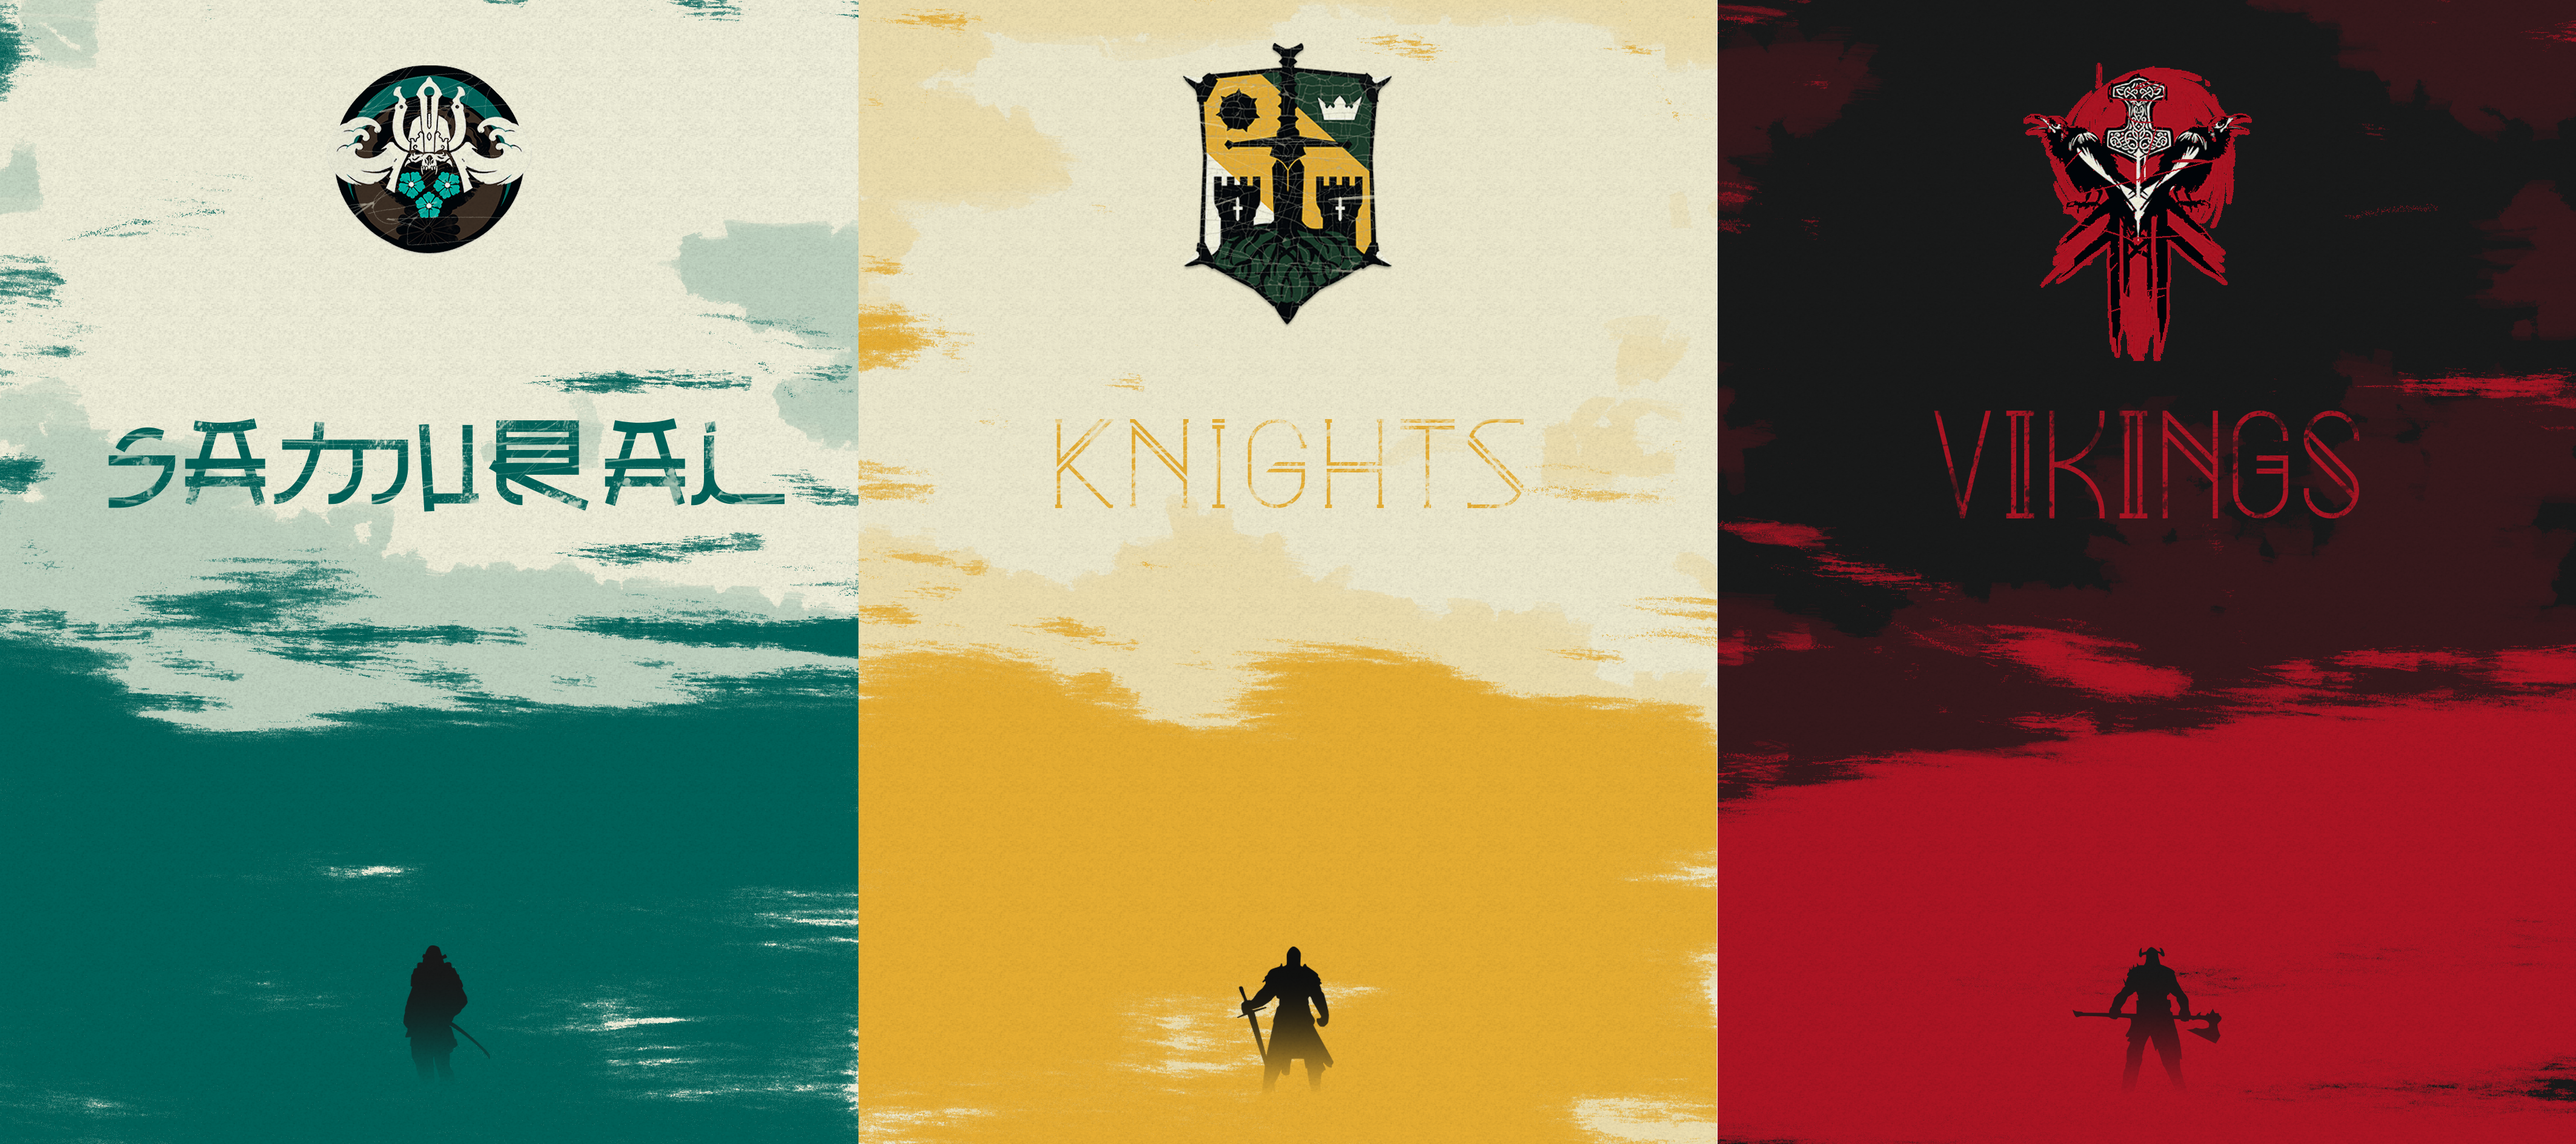 Minimalist For Honor Faction Posters